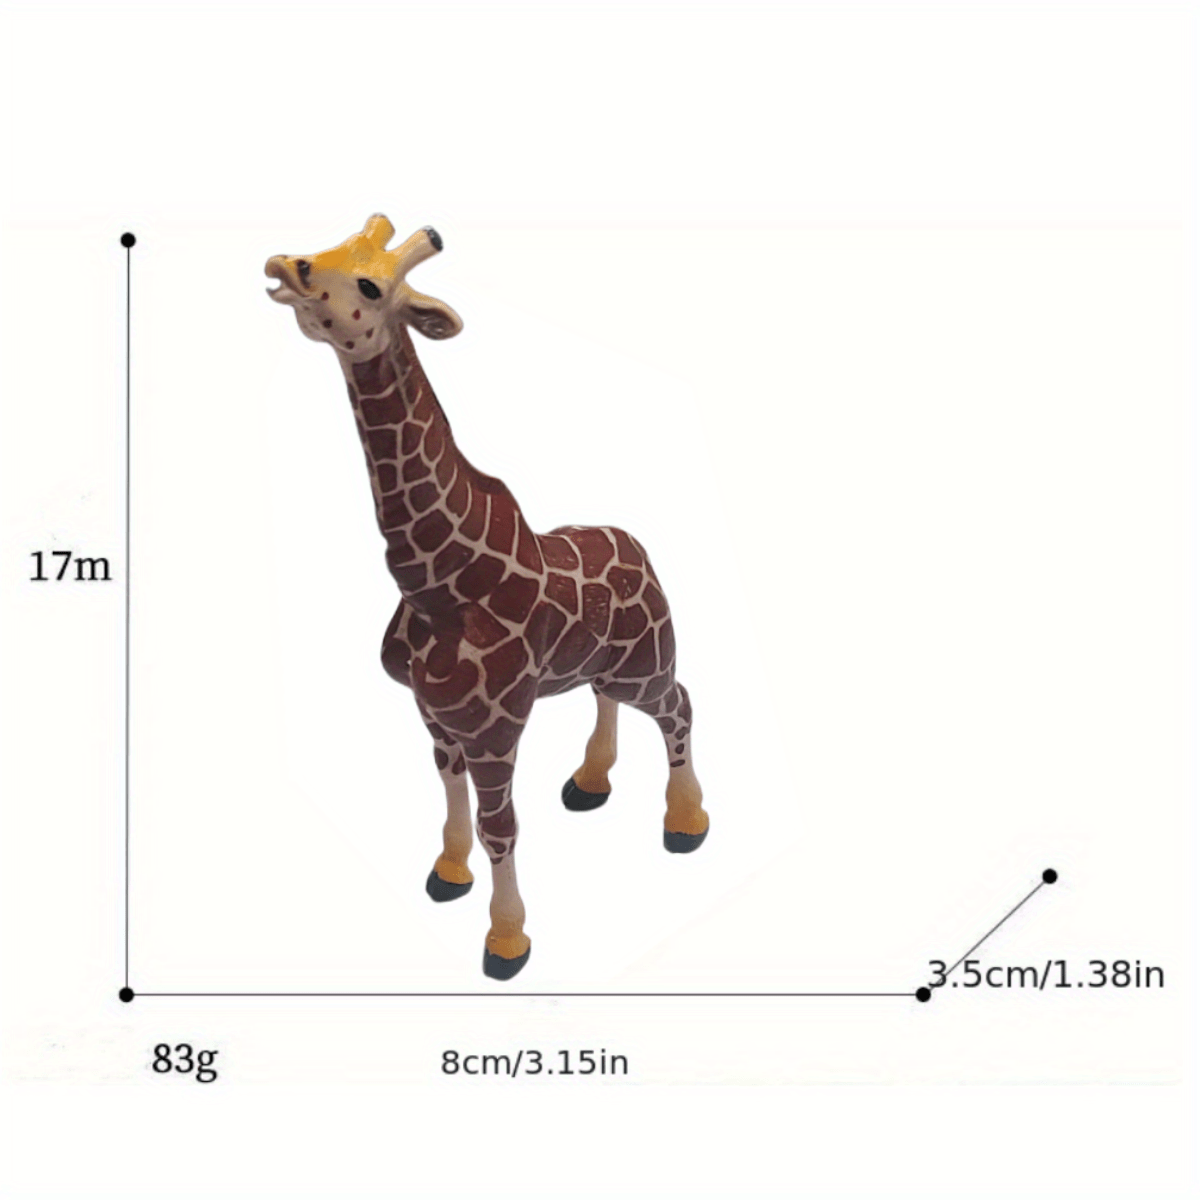 Animal Figurines Toys, 52 Pcs Small Mini Realistic Safari Zoo Plastic  Animals Figures Learning Educational Toy Set for Kids Toddlers Jungle Wild